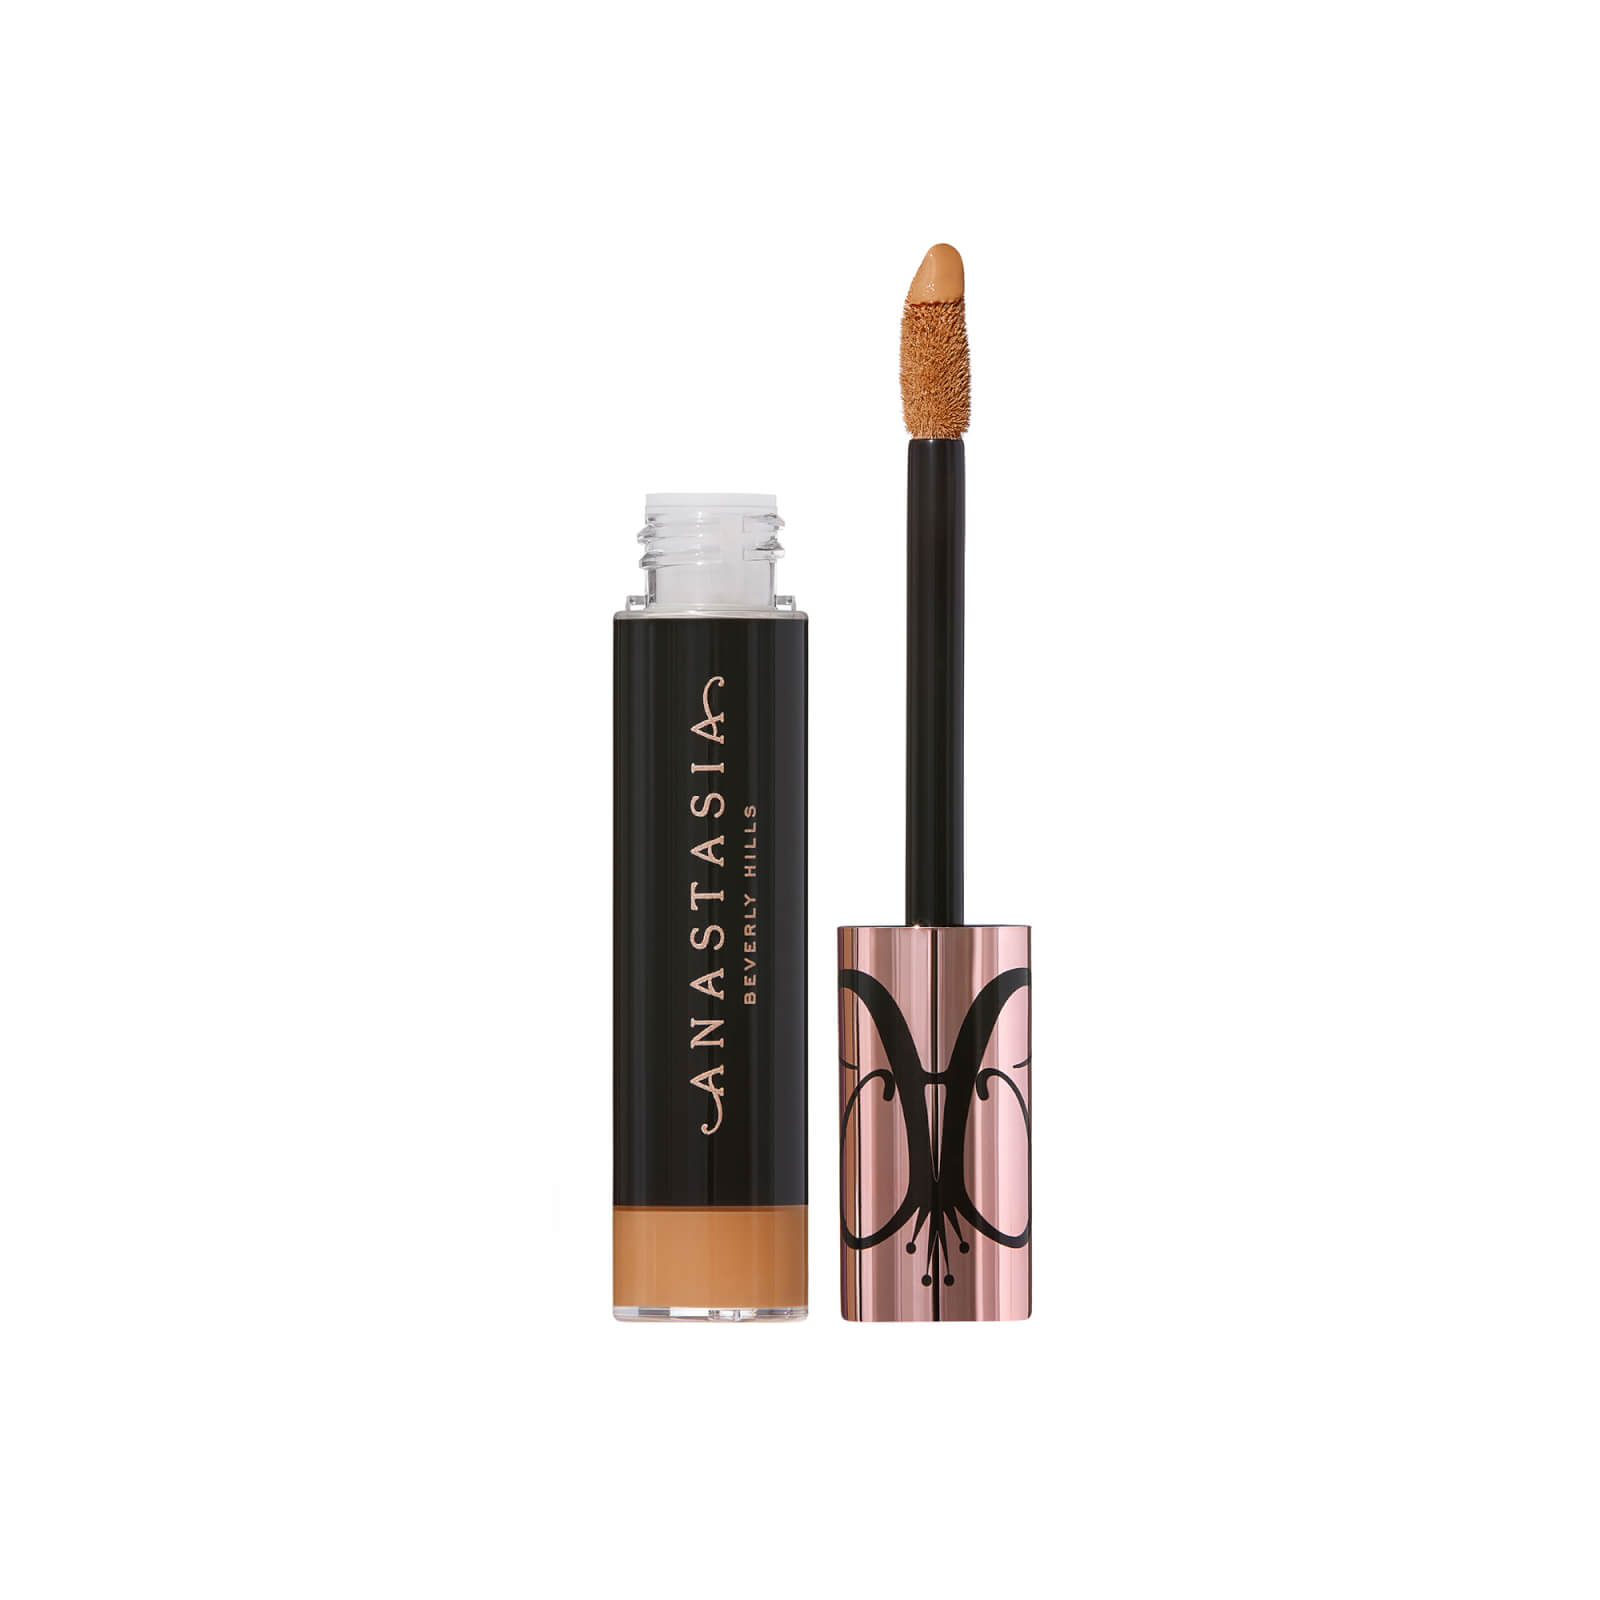 Anastasia Beverly Hills Magic Touch Concealer 12ml (Various Shades) - 19